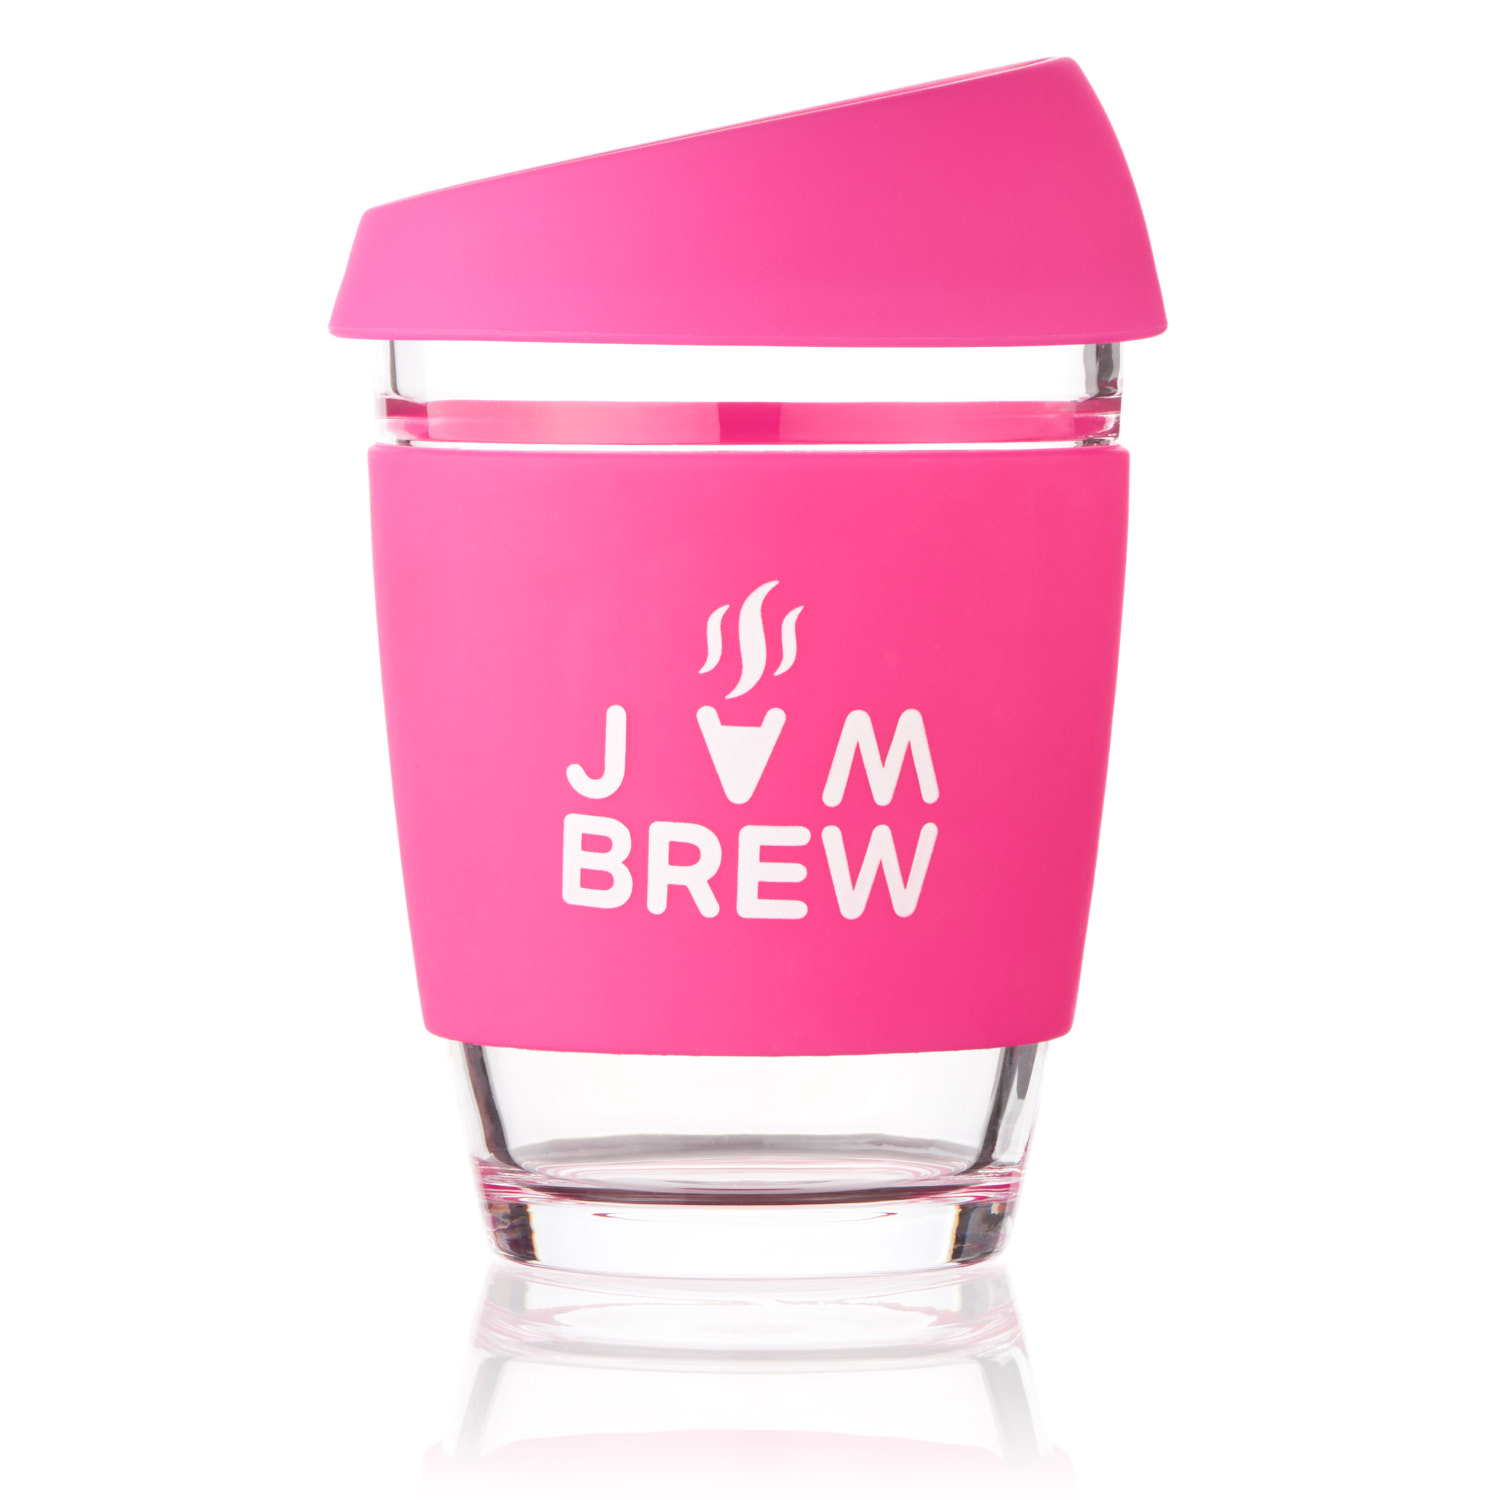 Reusable Glass Coffee Cups 340ml (Hot Pink - Top Trend This Season!) 